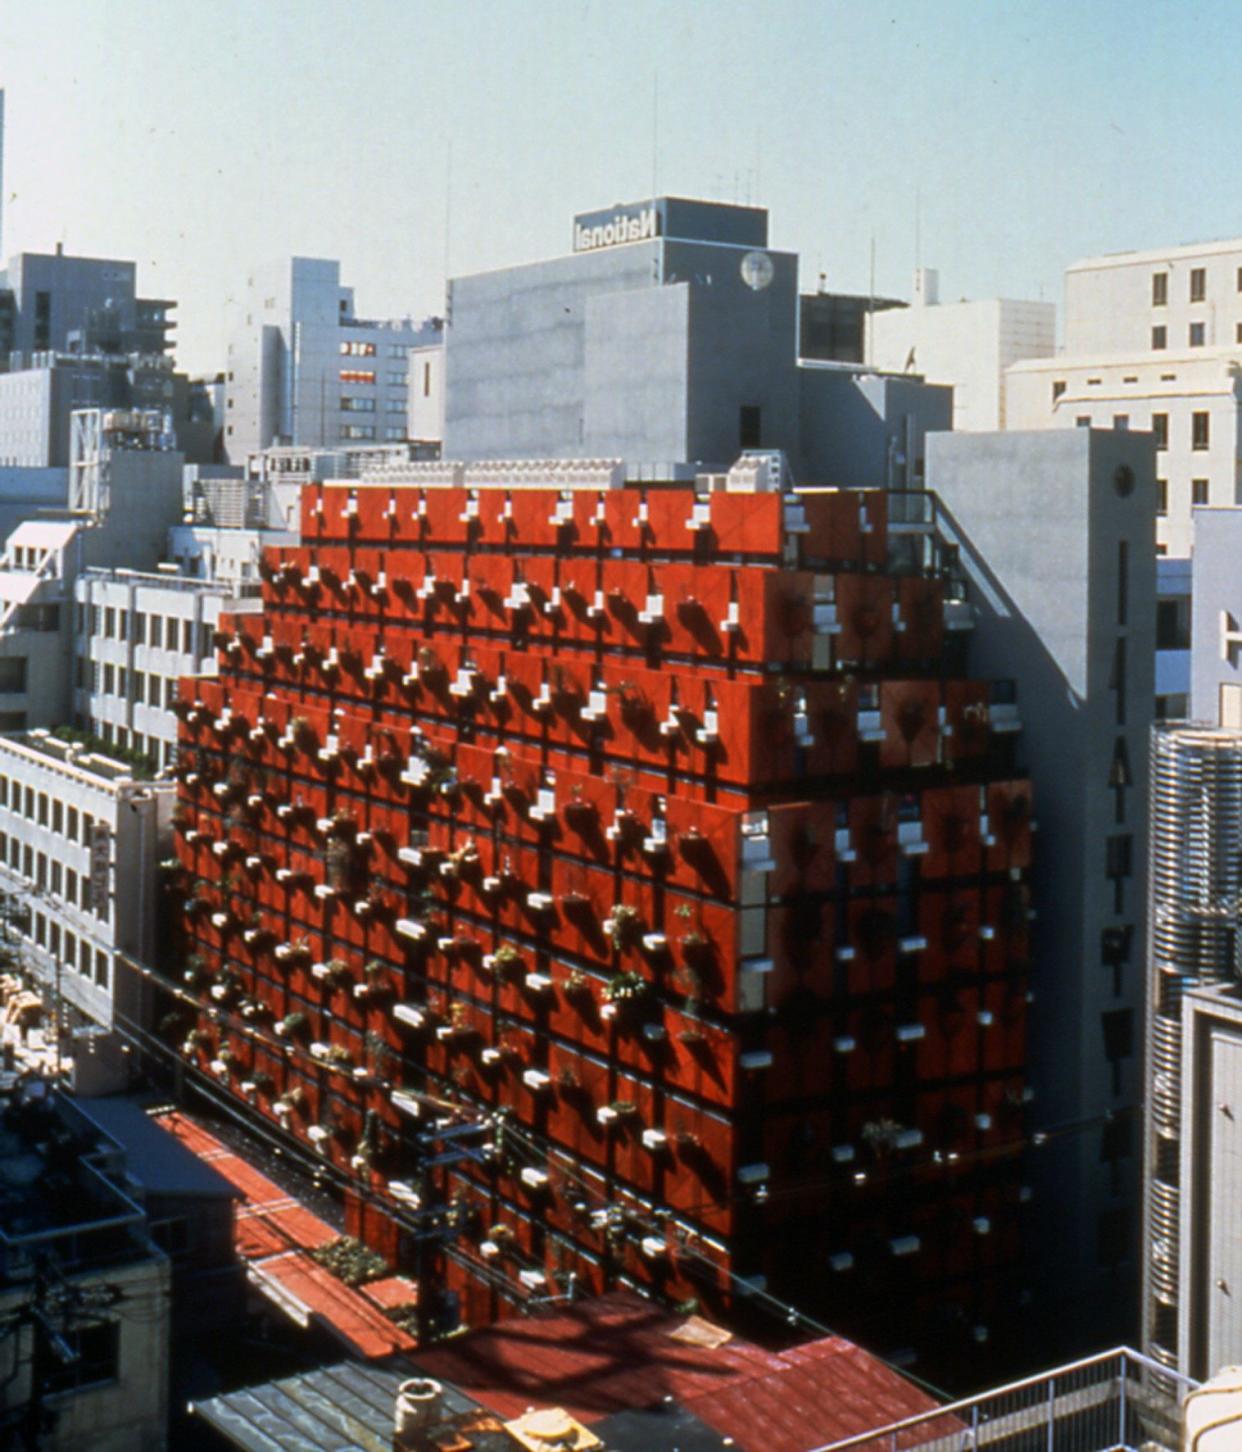 Pesce's 1989 Organic Building in Osaka, Japan, clad in a vertical garden